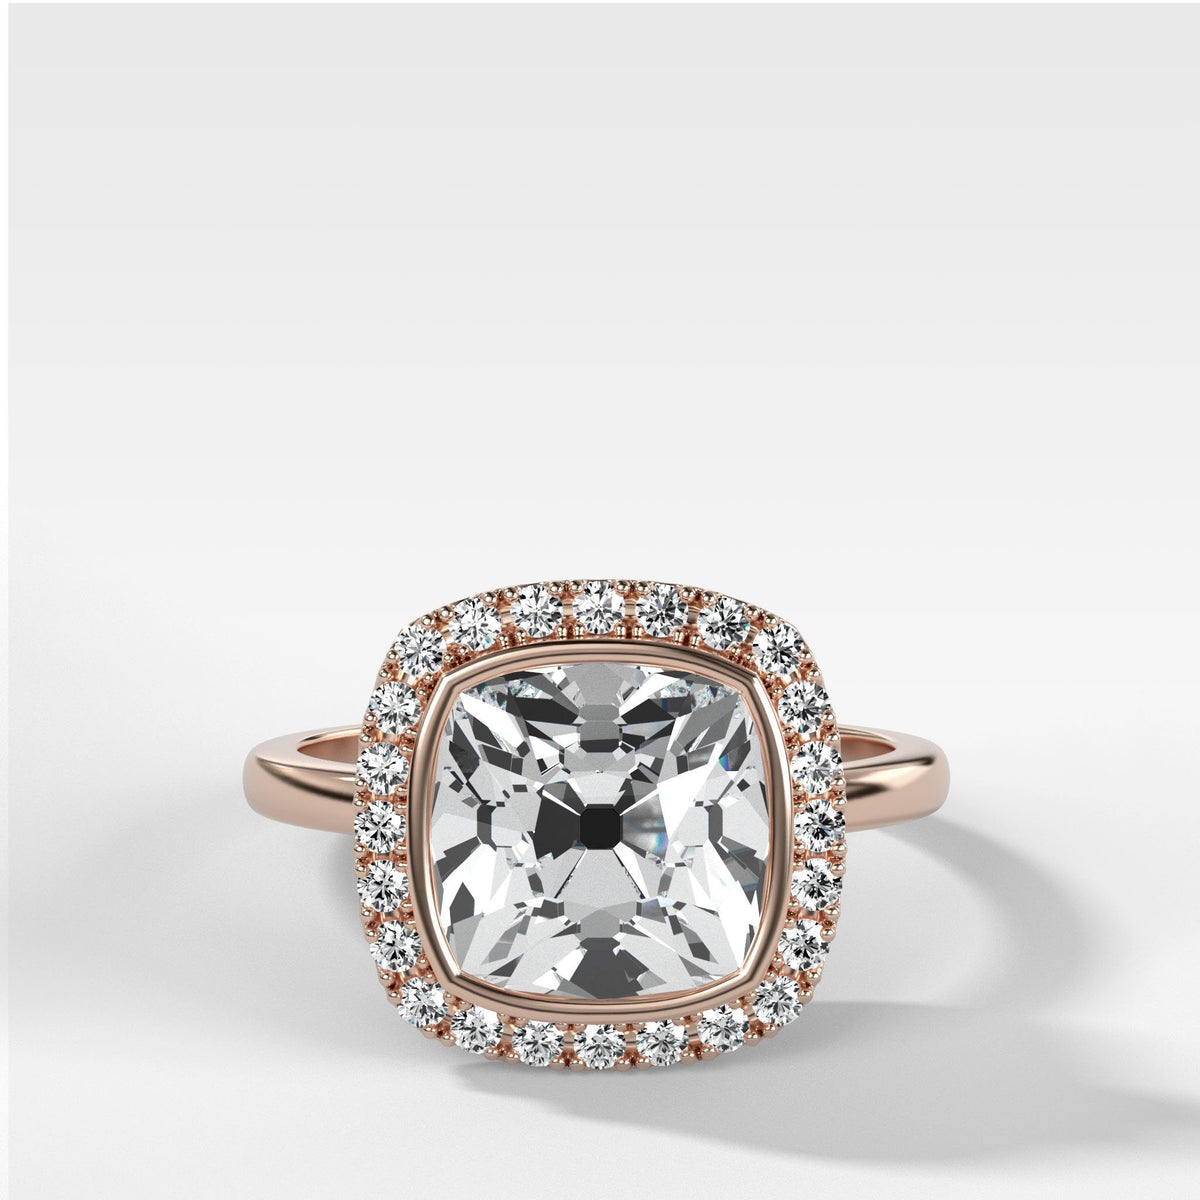 Bezel Set Halo Engagement Ring With Old Mine Cut by Good Stone in Rose Gold